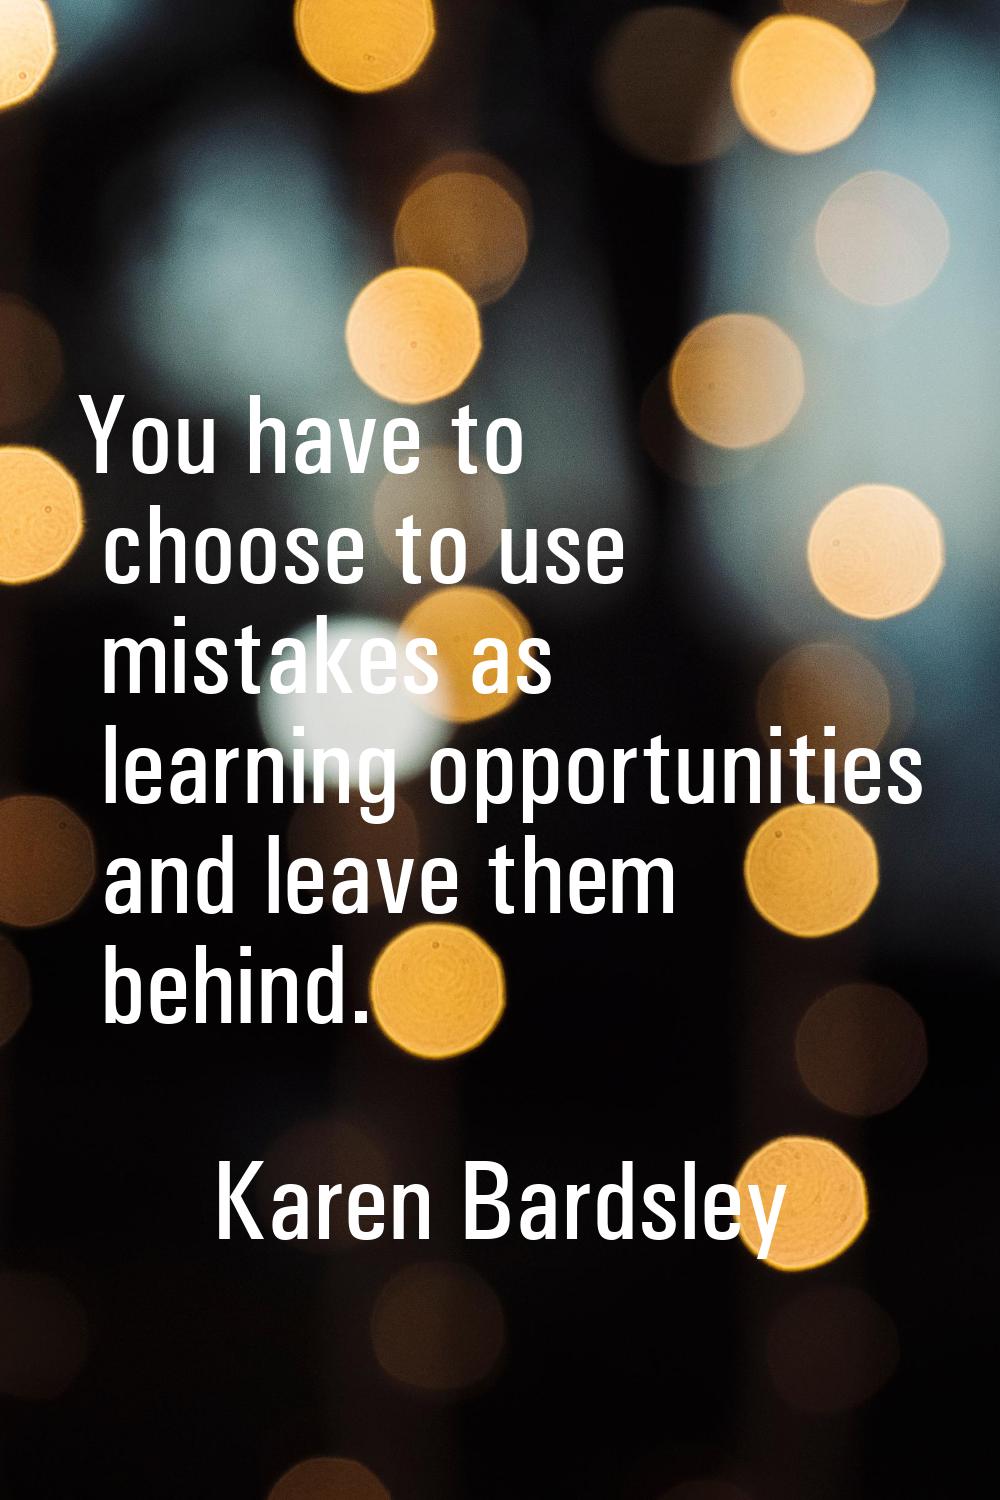 You have to choose to use mistakes as learning opportunities and leave them behind.